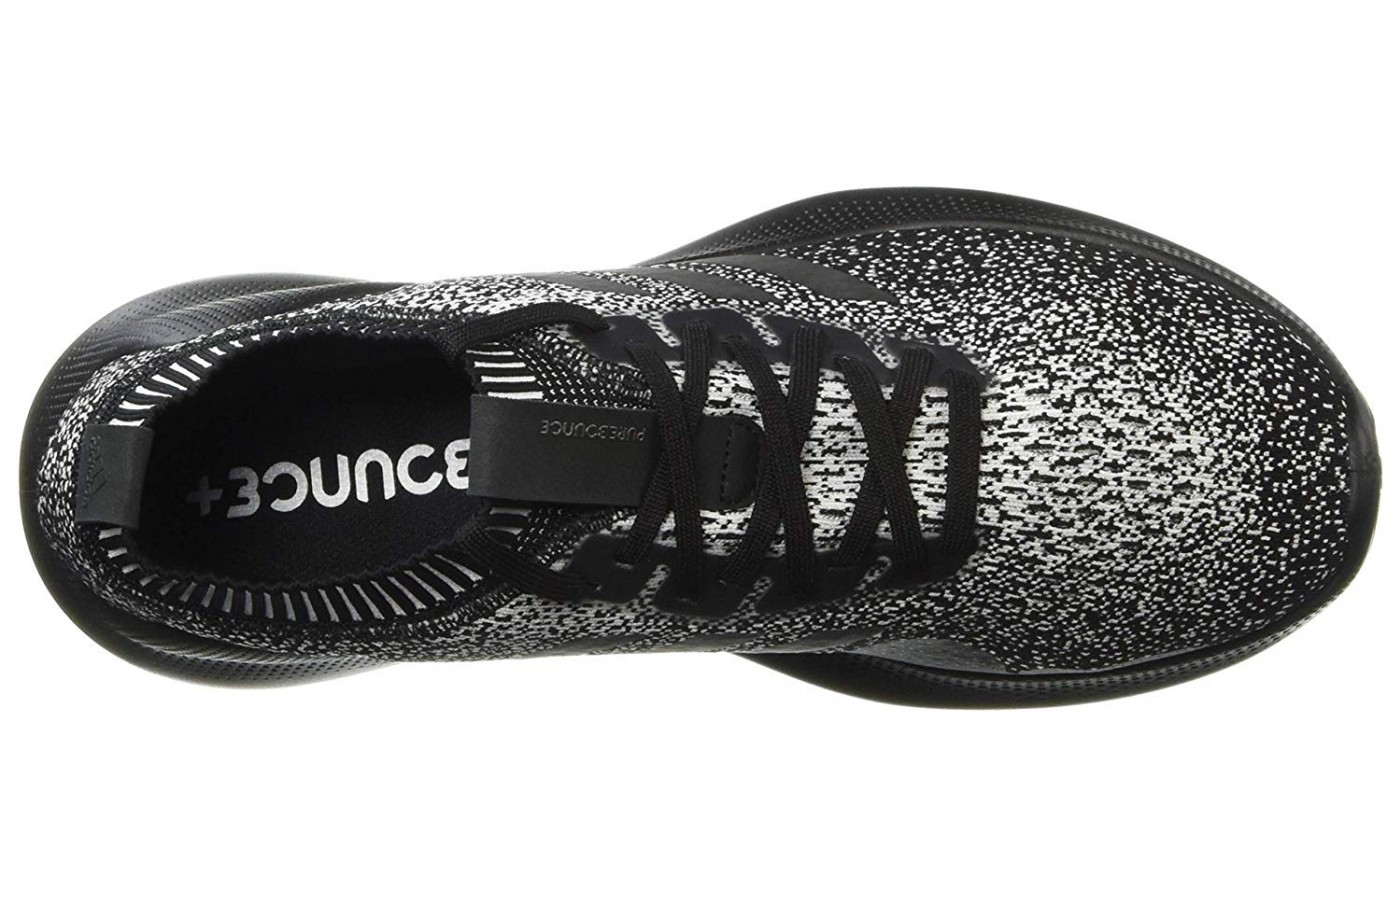 Top view of Adidas Purebounce+